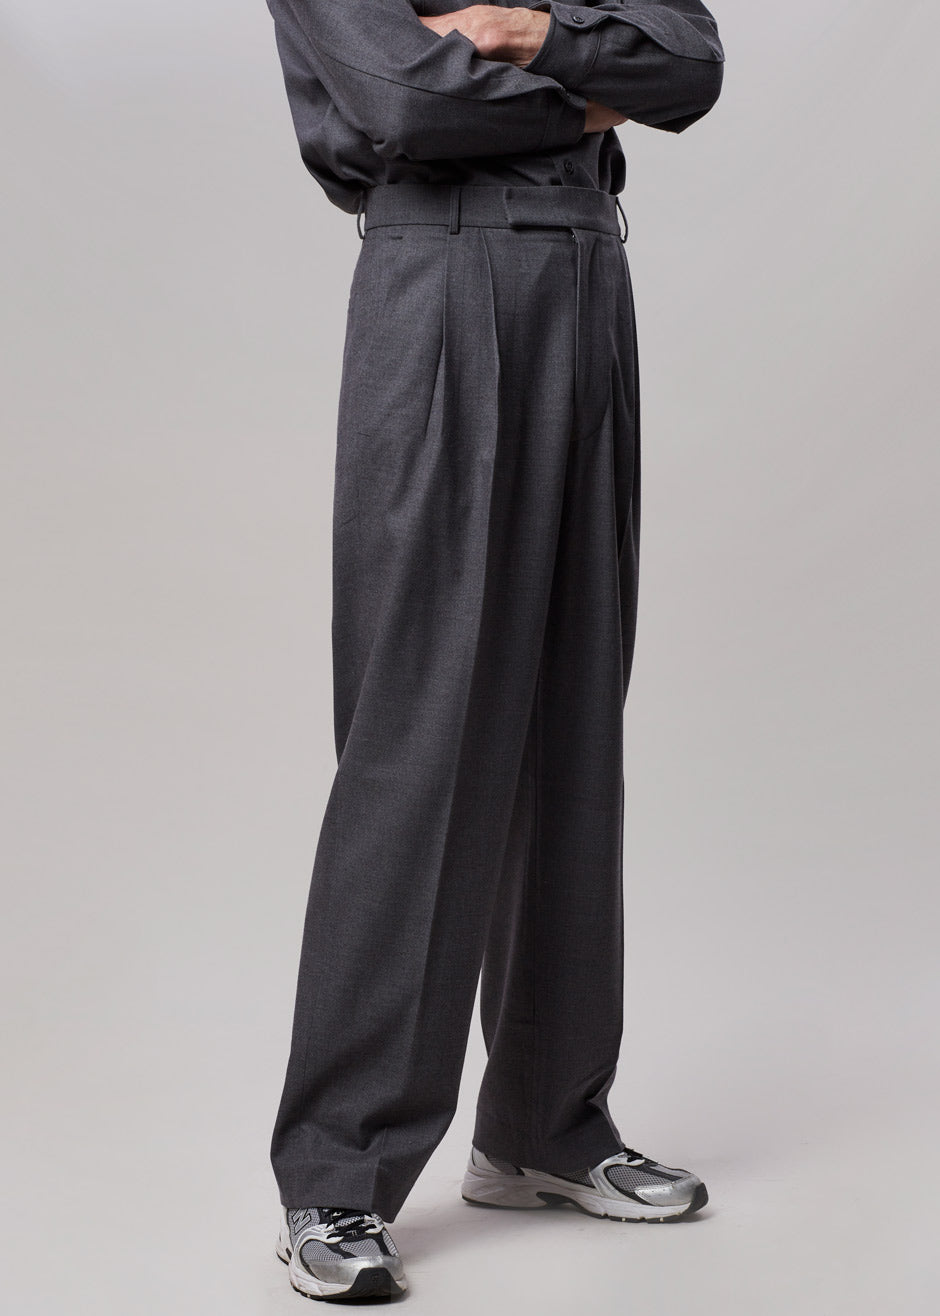 Heith Flanelle Suit Pants - Charcoal - 4